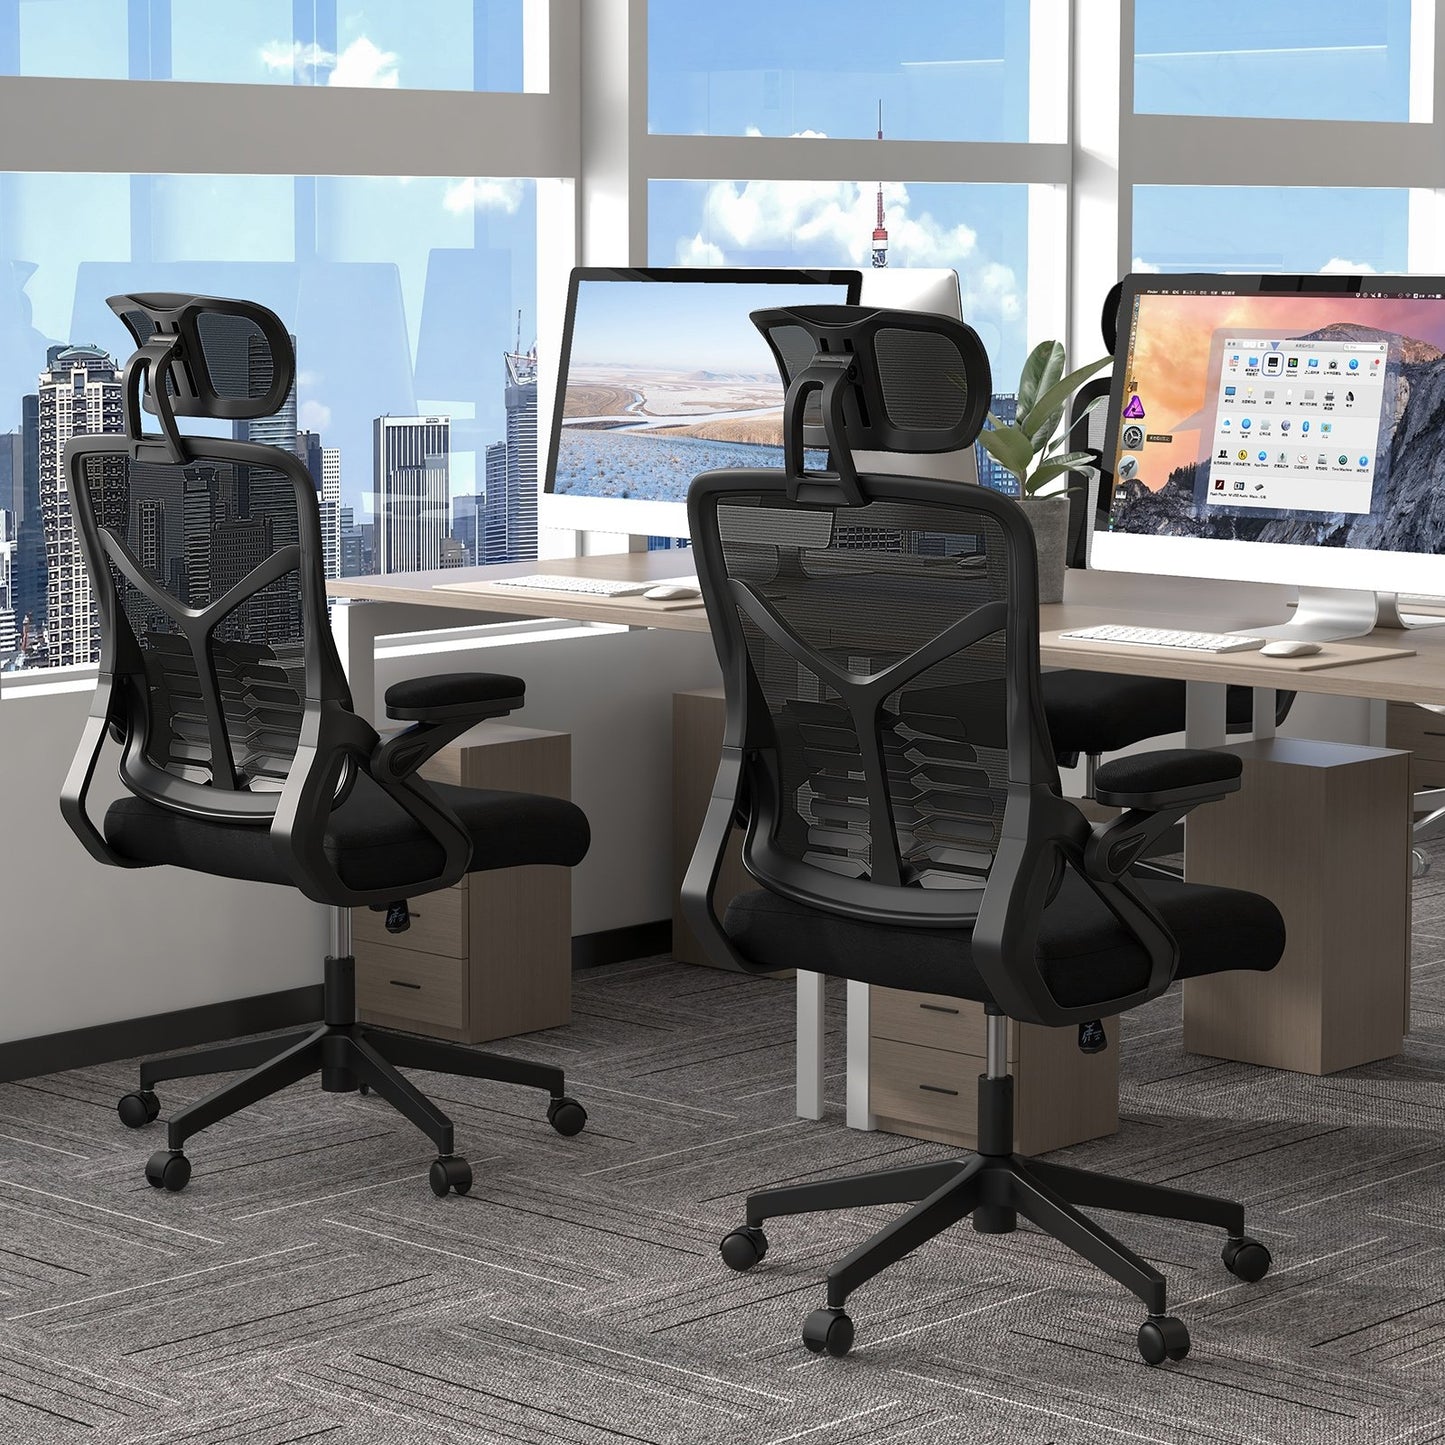 Ergonomic Mesh Office Chair with Lumbar Support and Rocking Function, Black